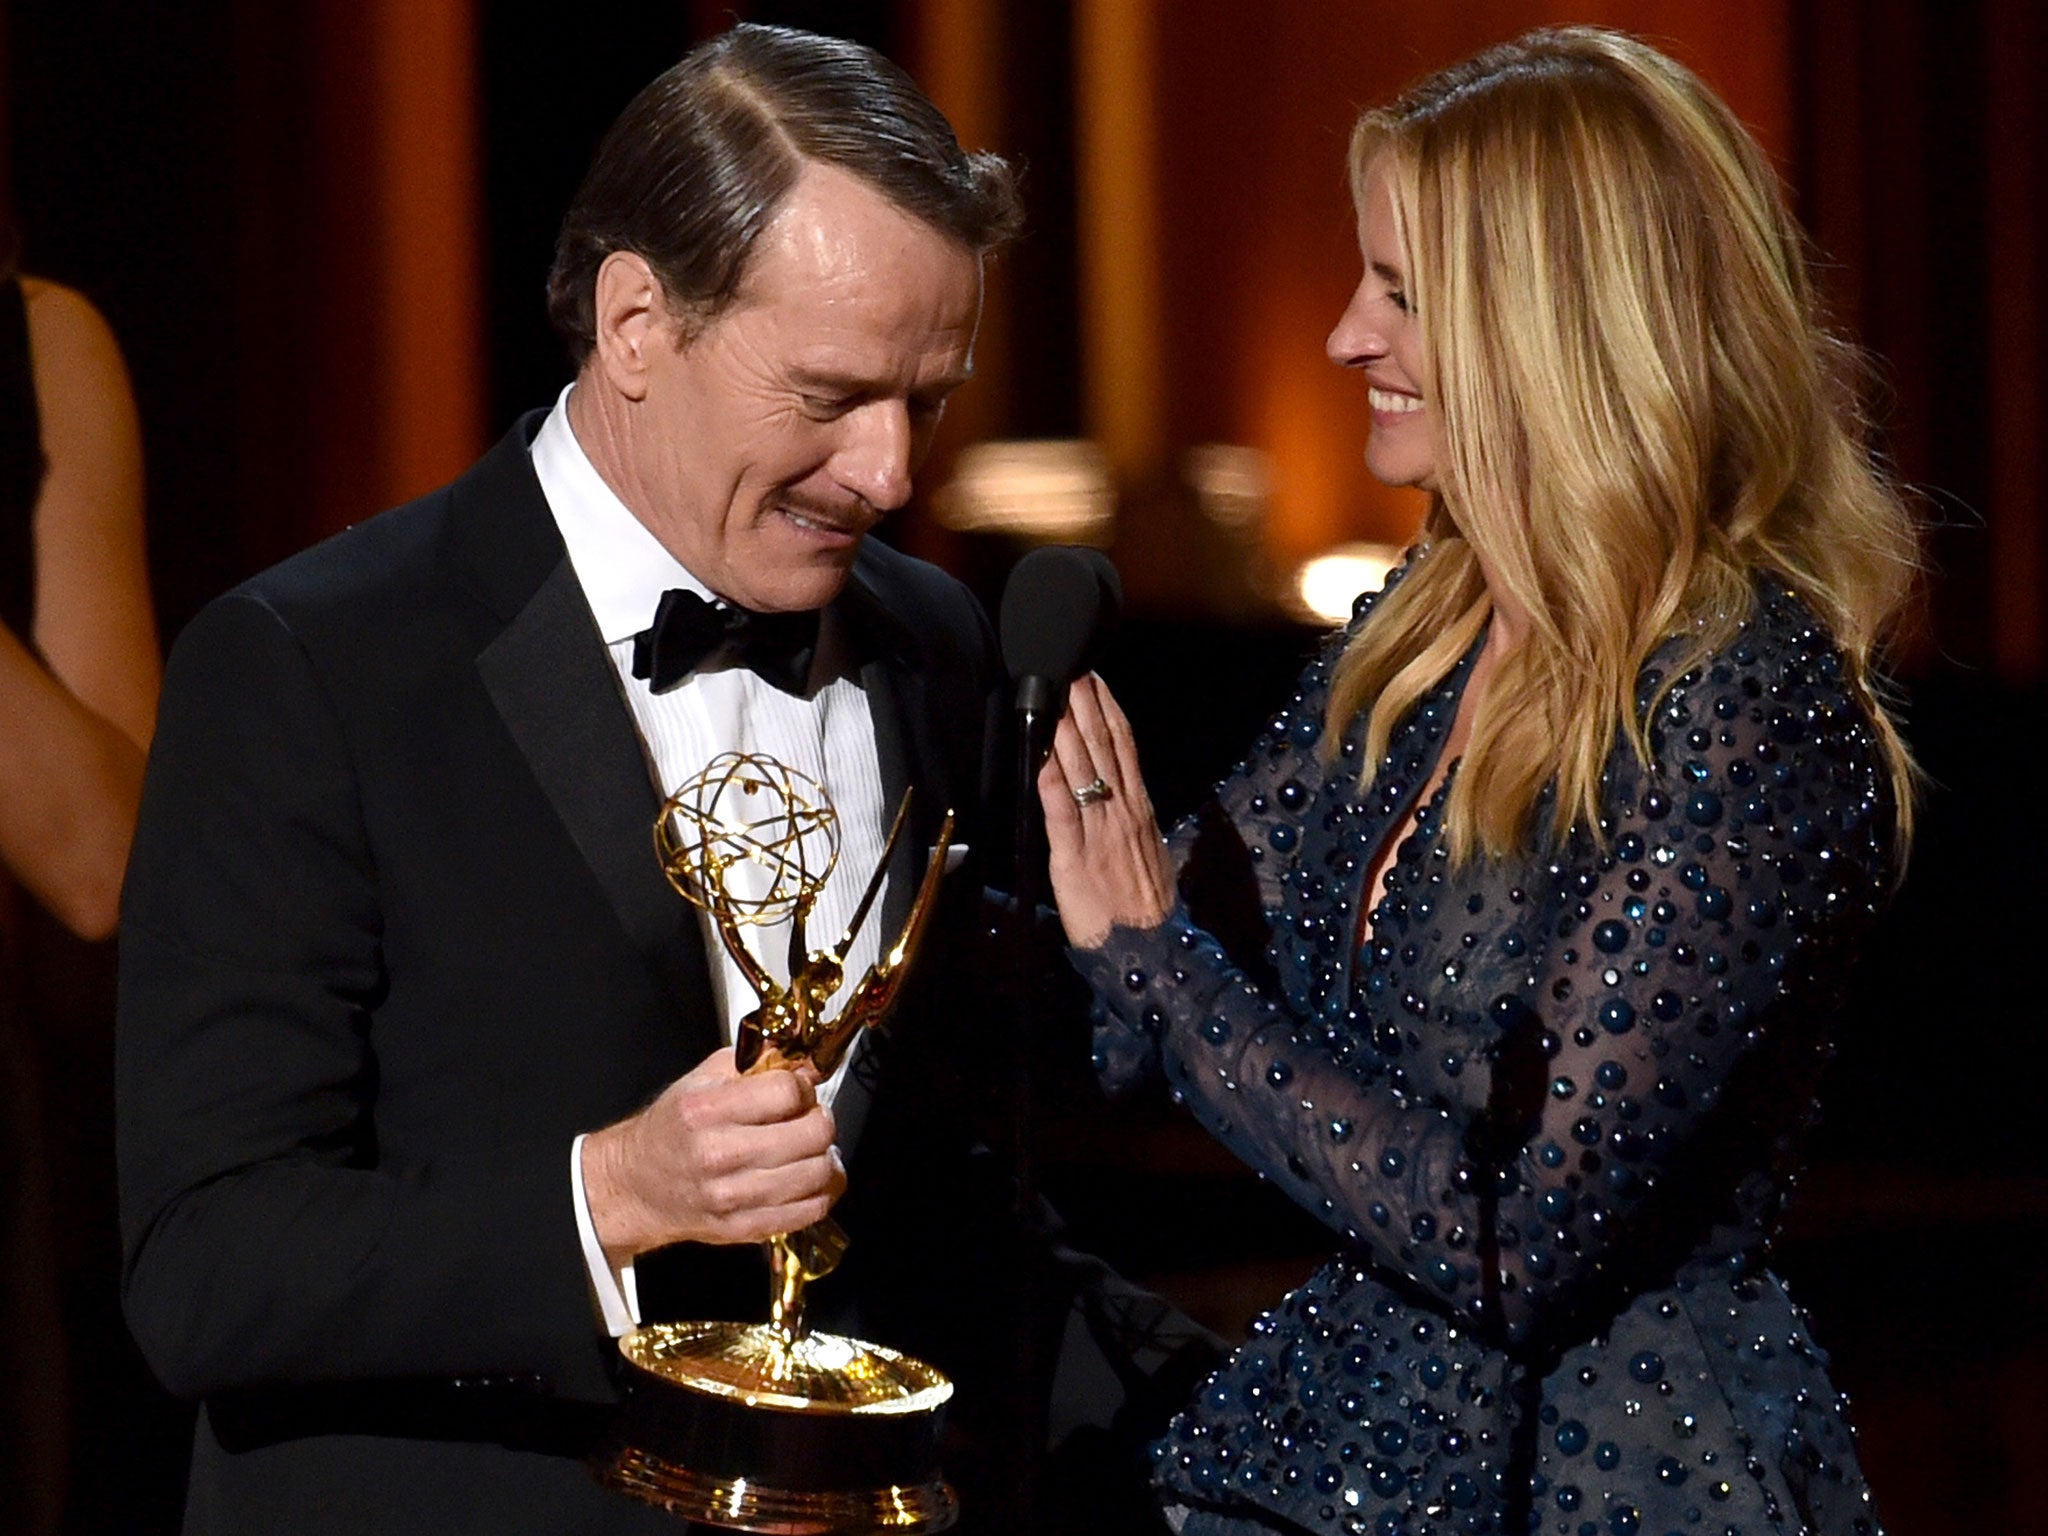 Actor Bryan Cranston (L) accepts Outstanding Lead Actor in a Drama Series for 'Breaking Bad' from actress Julia Roberts onstage at the 66th Annual Primetime Emmy Awards held at Nokia Theatre L.A. Live on August 25, 2014.